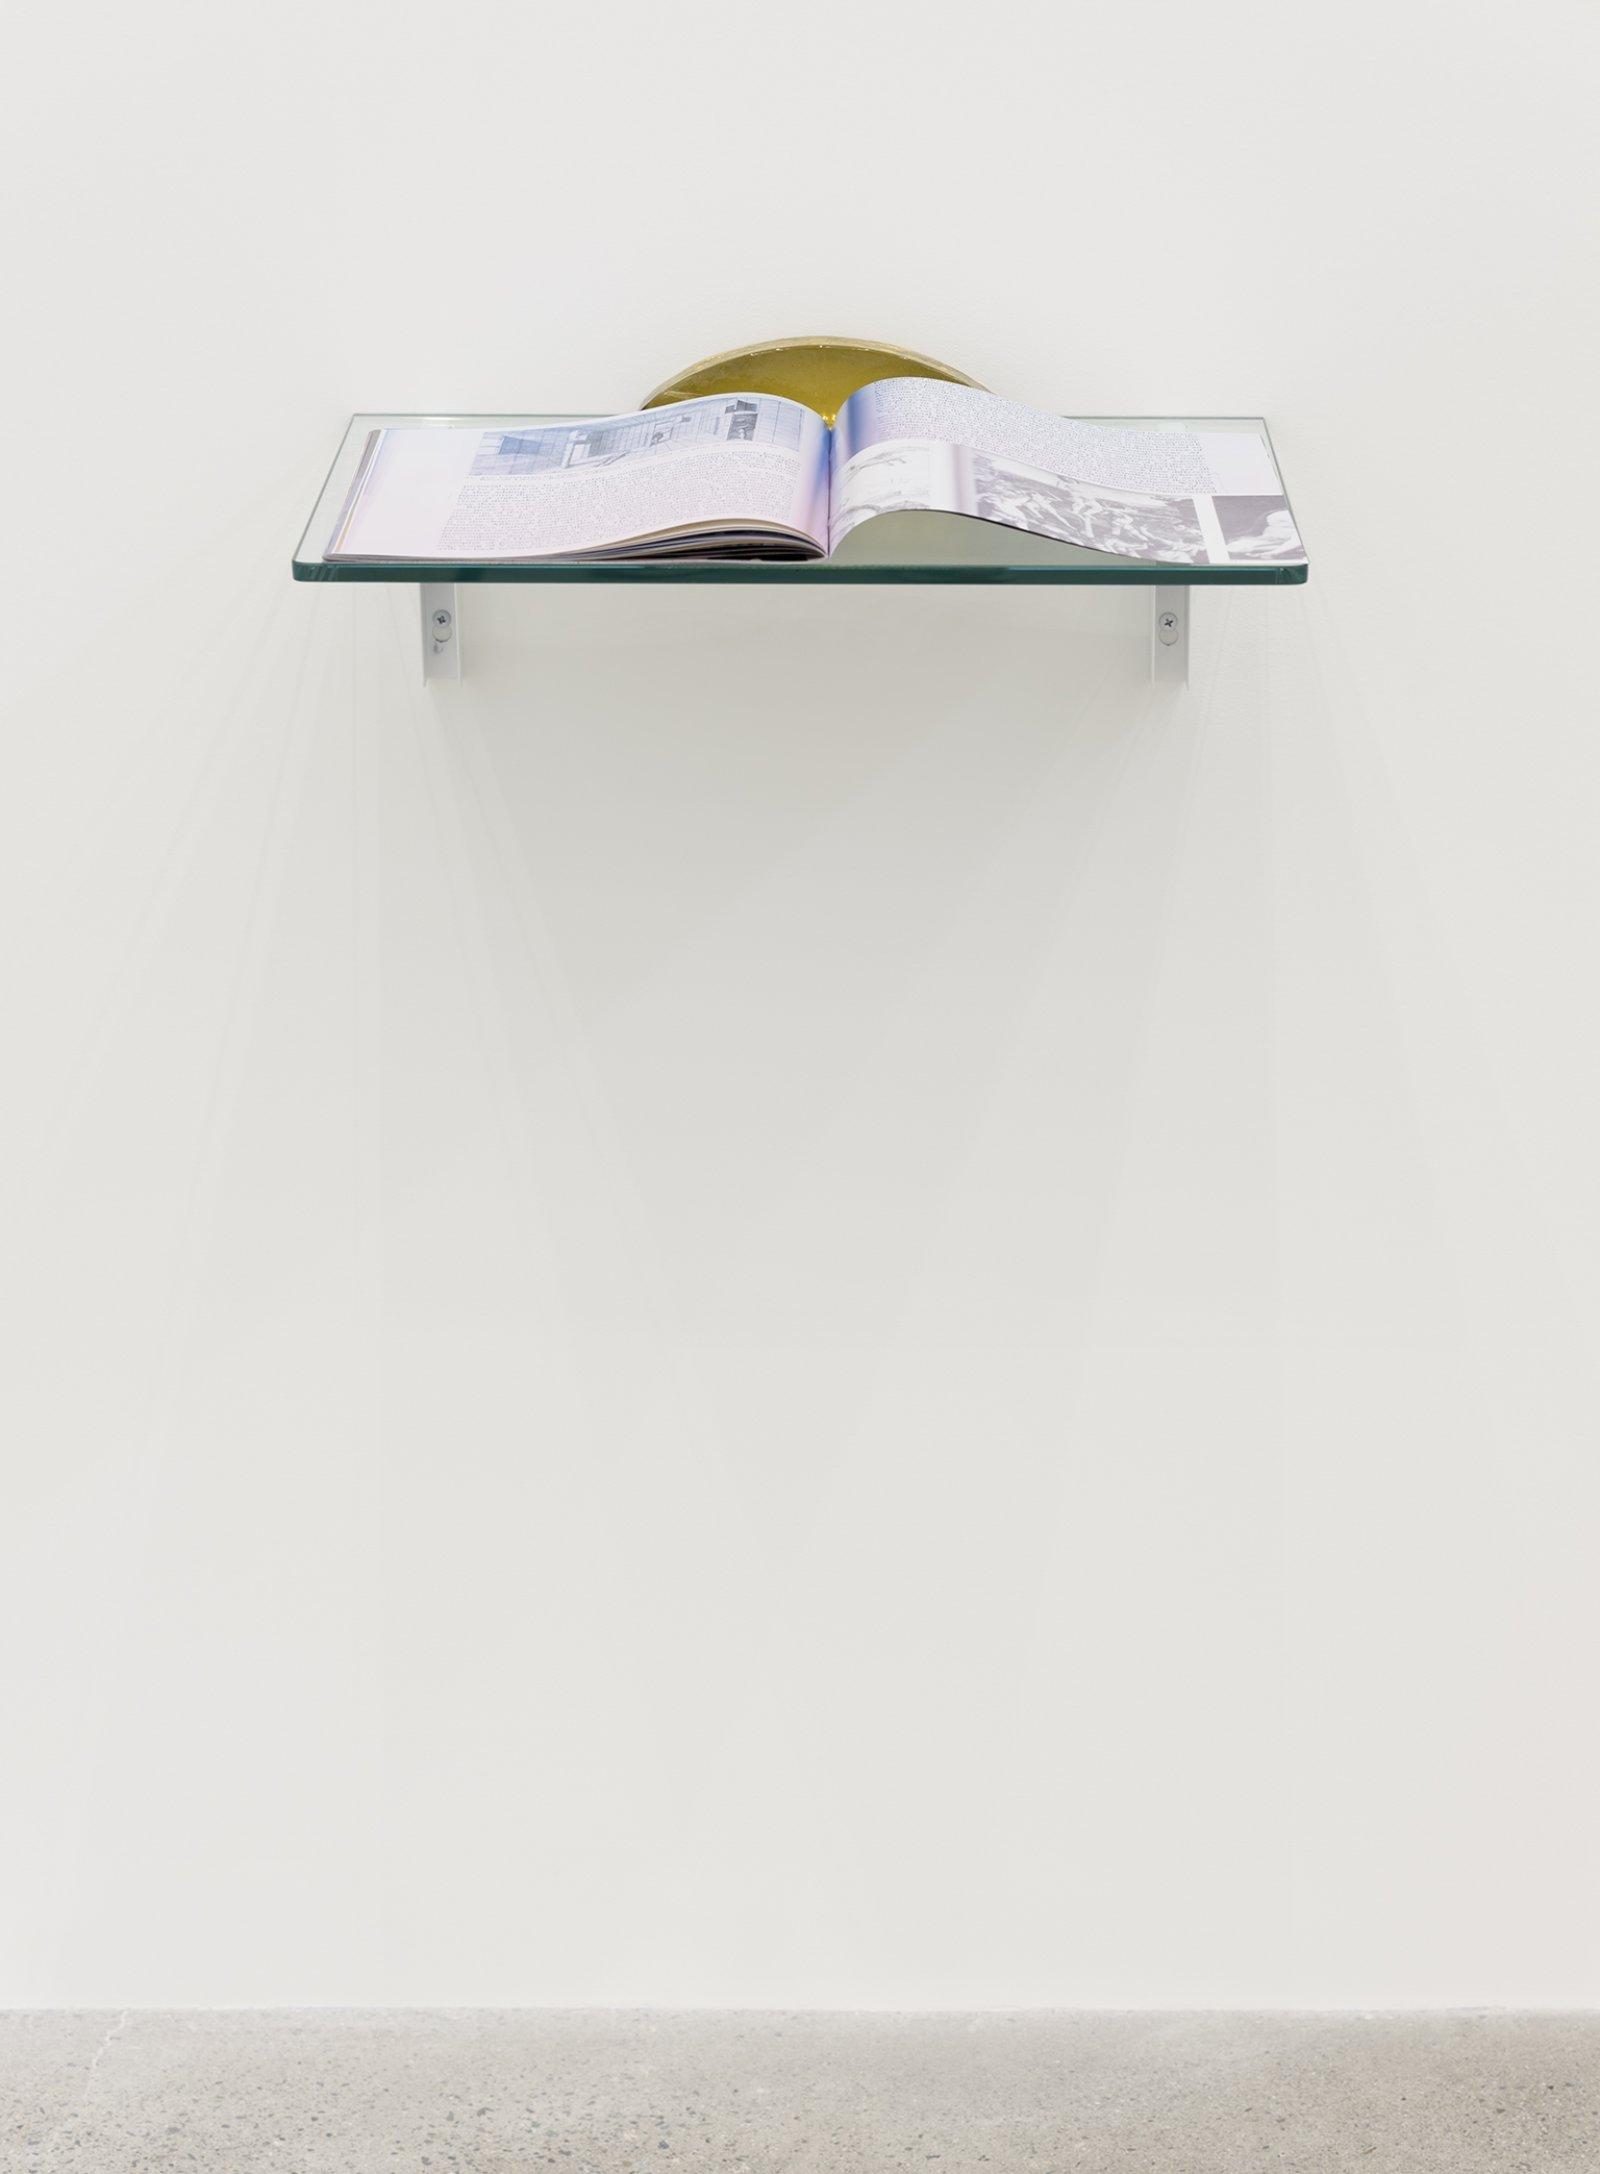 Judy Radul, Kings Never Touch Doors (detail), 2017–2019, fabric panels, pressed glass, “Dedicated to Swinging Thoughts” artist’s magazine, glass shelf, dimensions variable